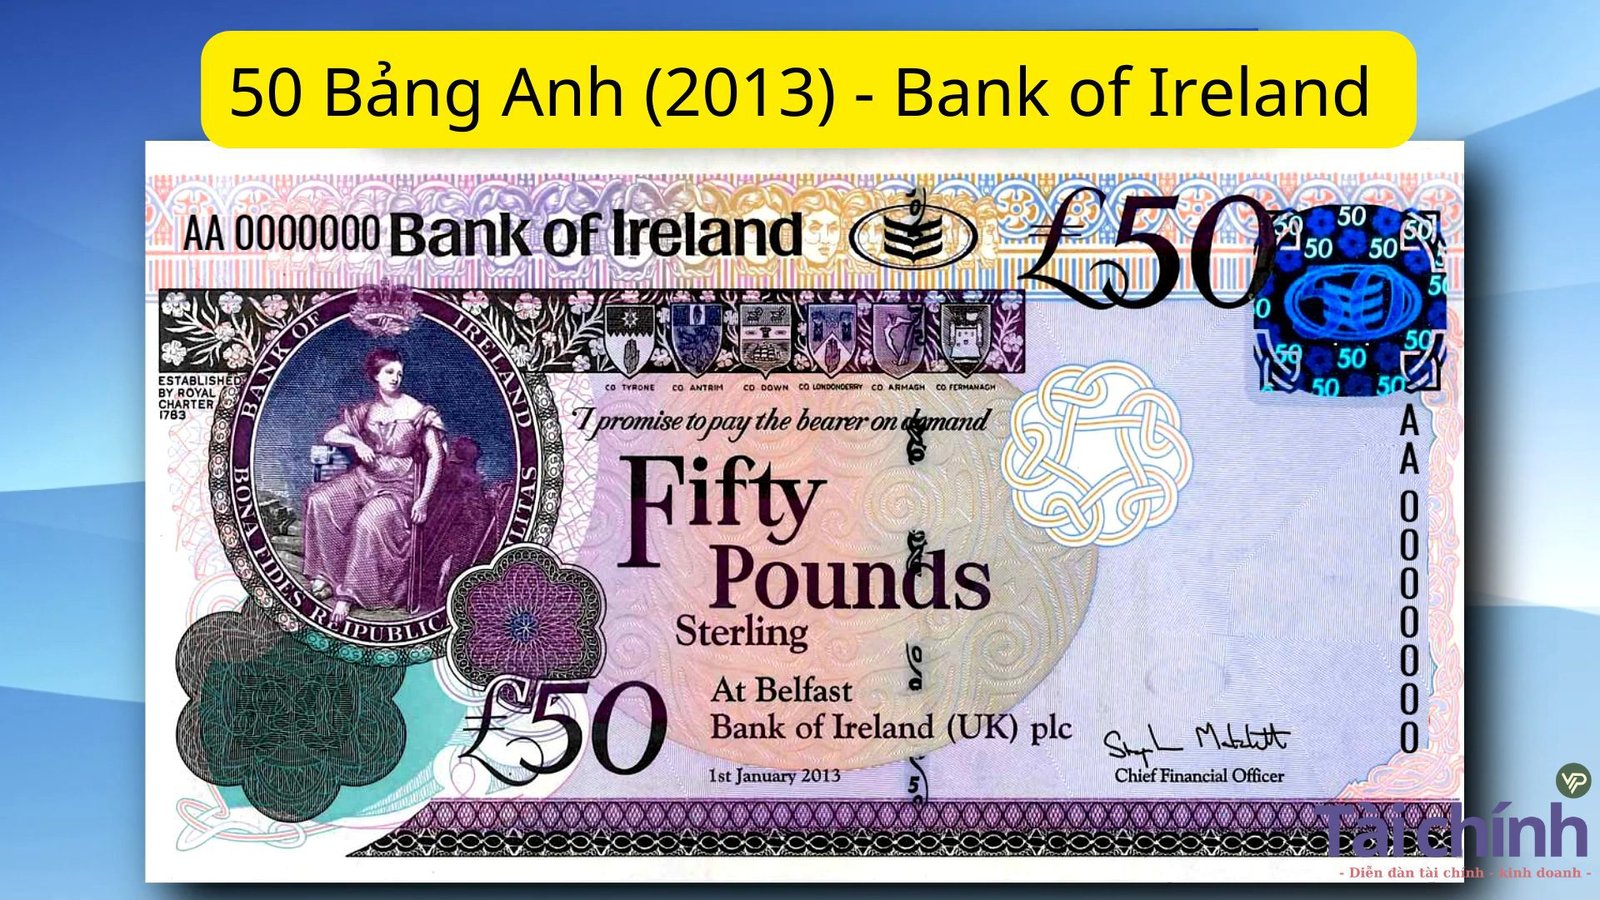 50 Bảng Anh (2013) - Bank of Ireland